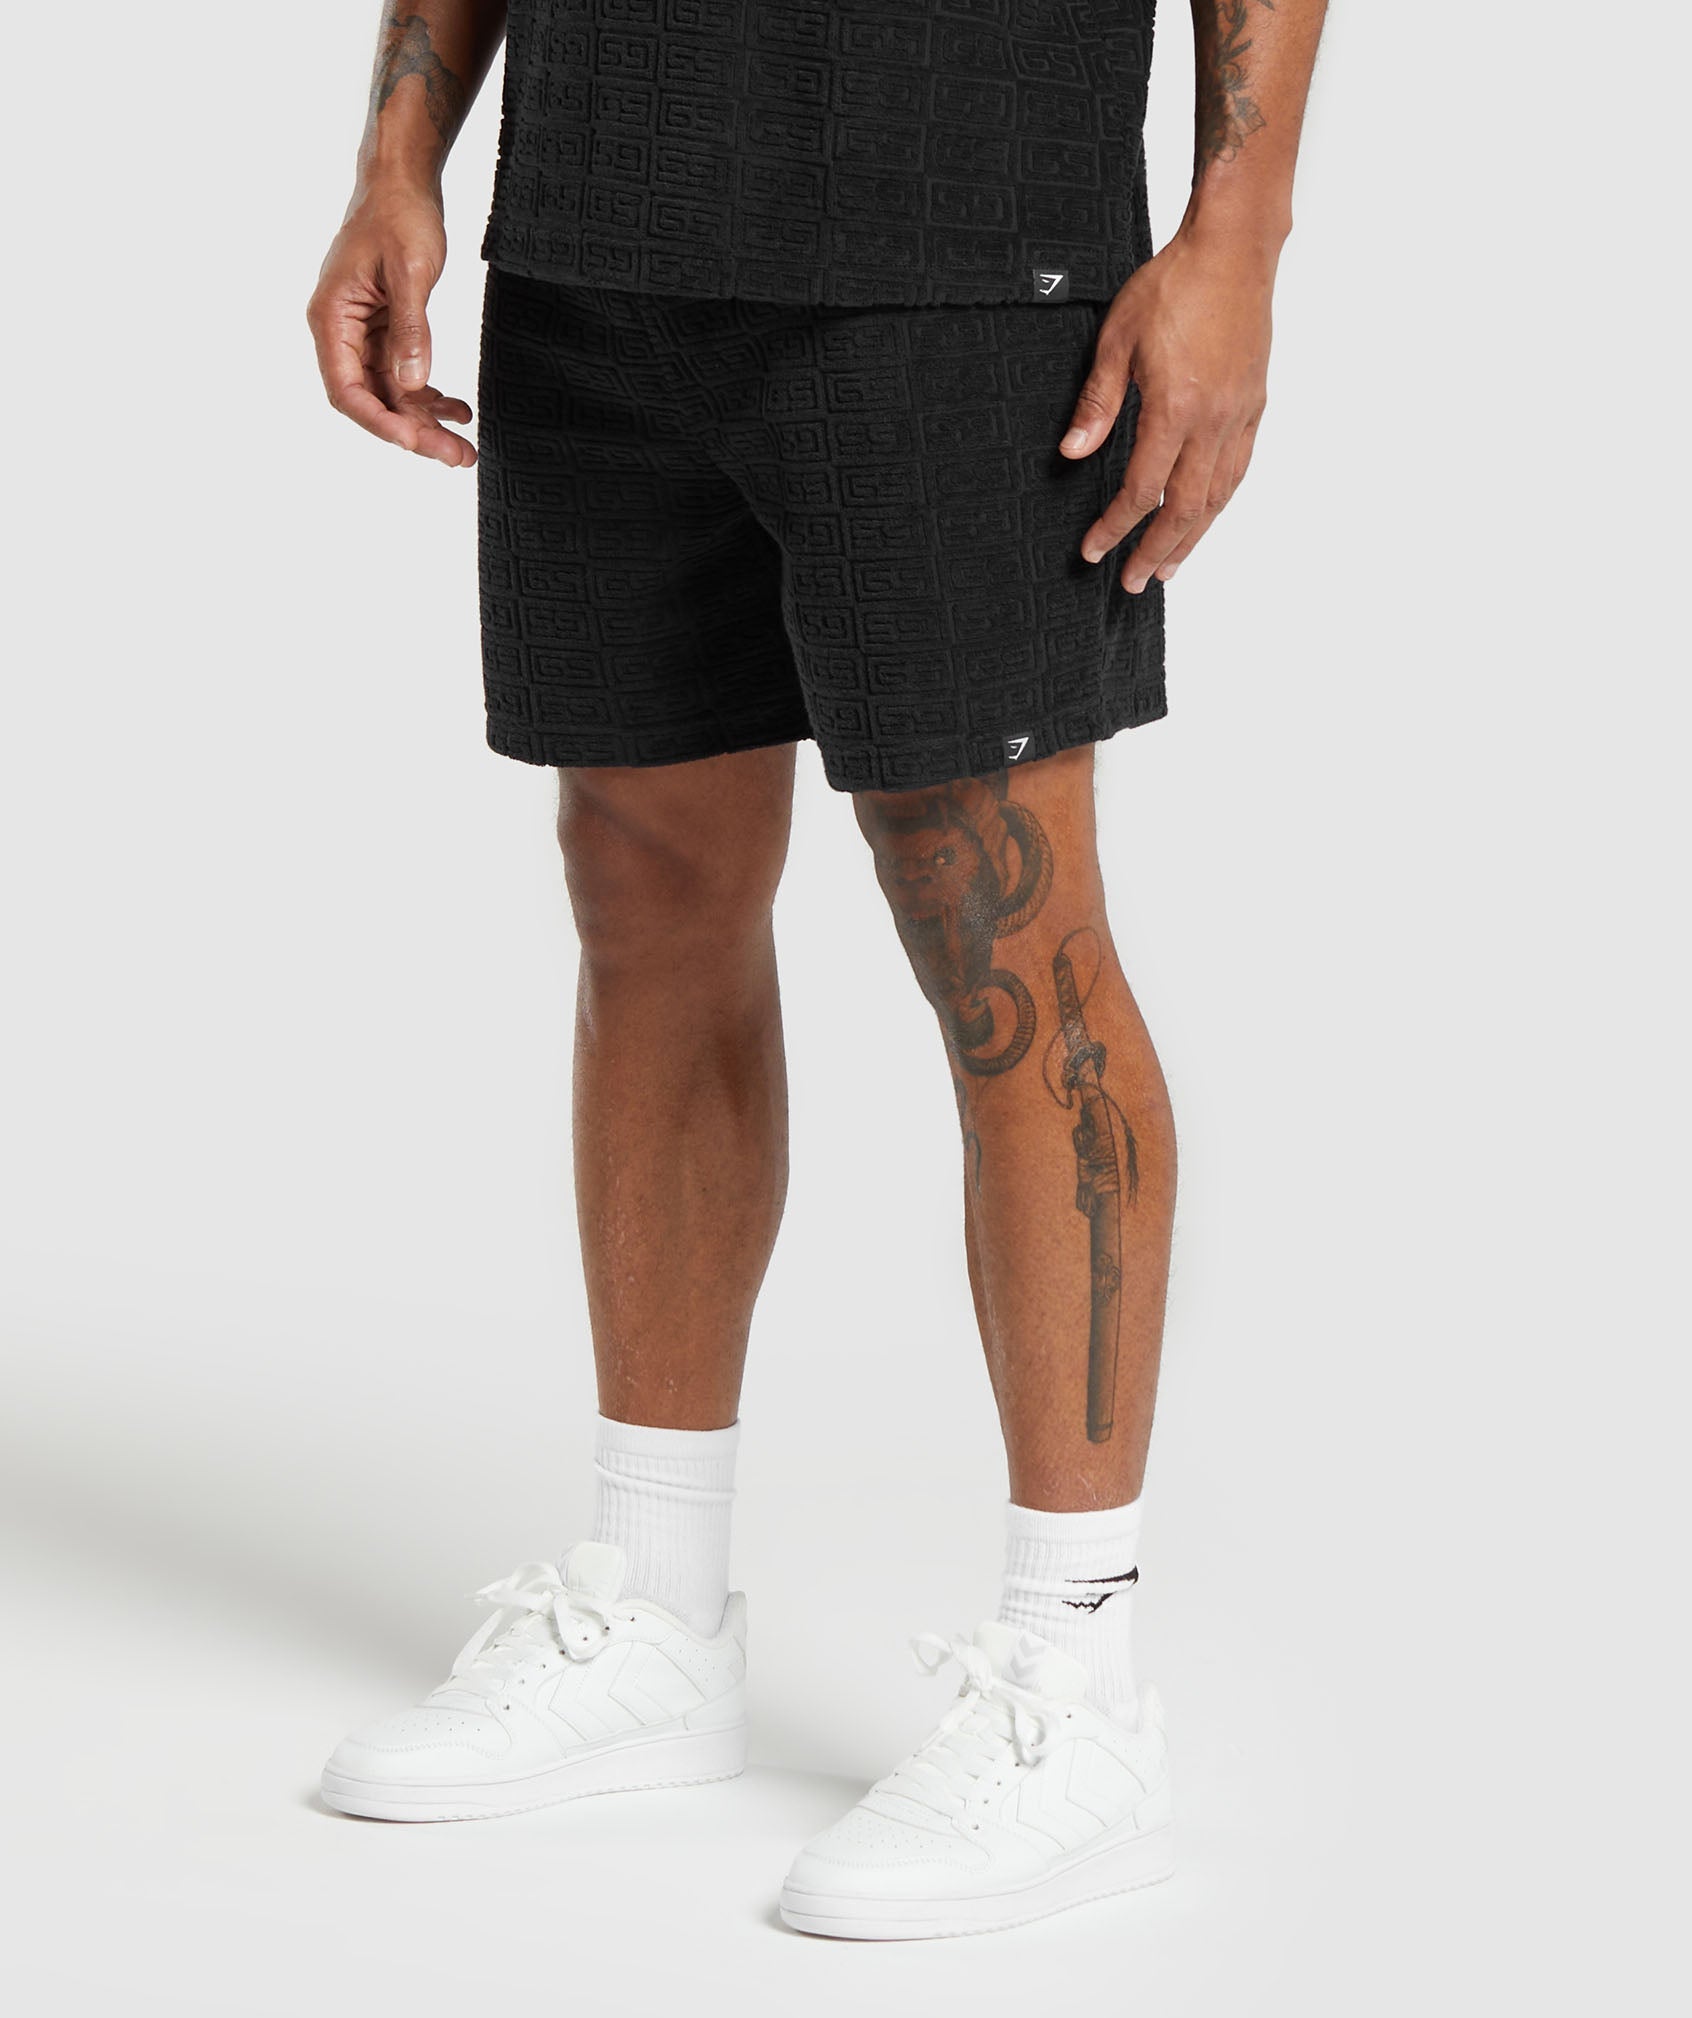 Towelling 7" Shorts in Black - view 3